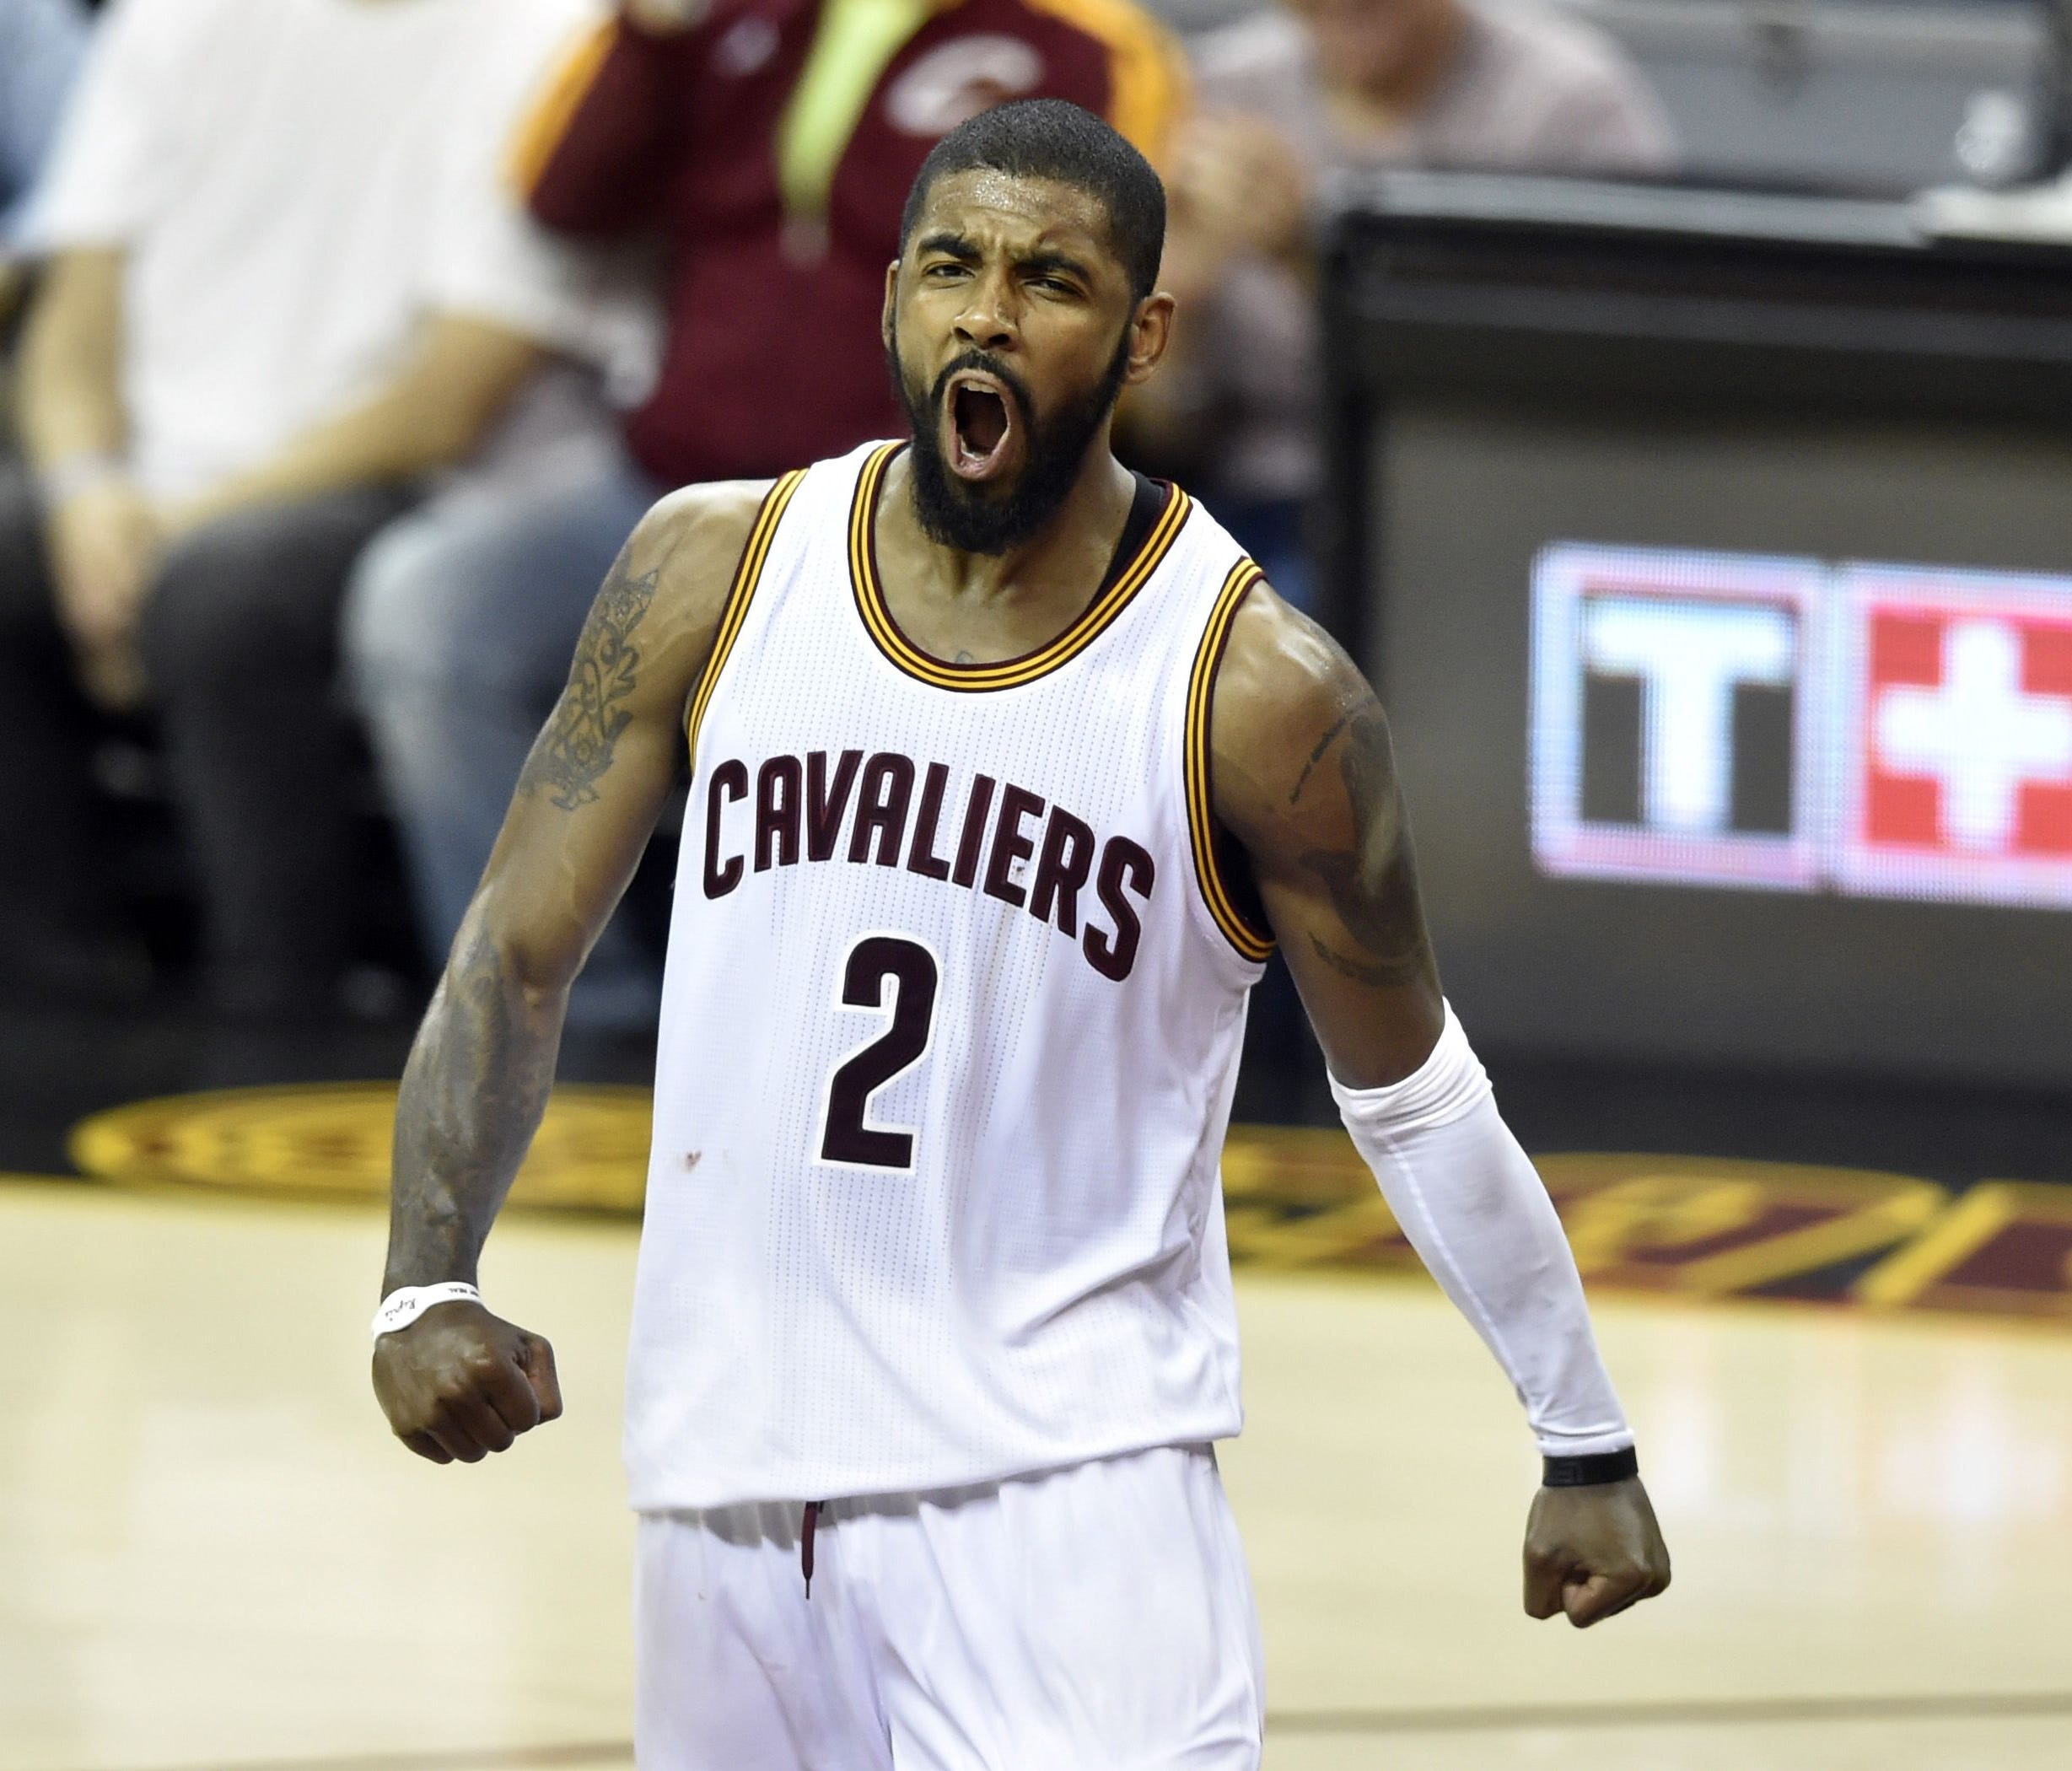 Cleveland Cavaliers guard Kyrie Irving (2) reacts after making a three-point basket at the end of the third quarter against the Boston Celtics in game four of the Eastern conference finals of the NBA Playoffs.